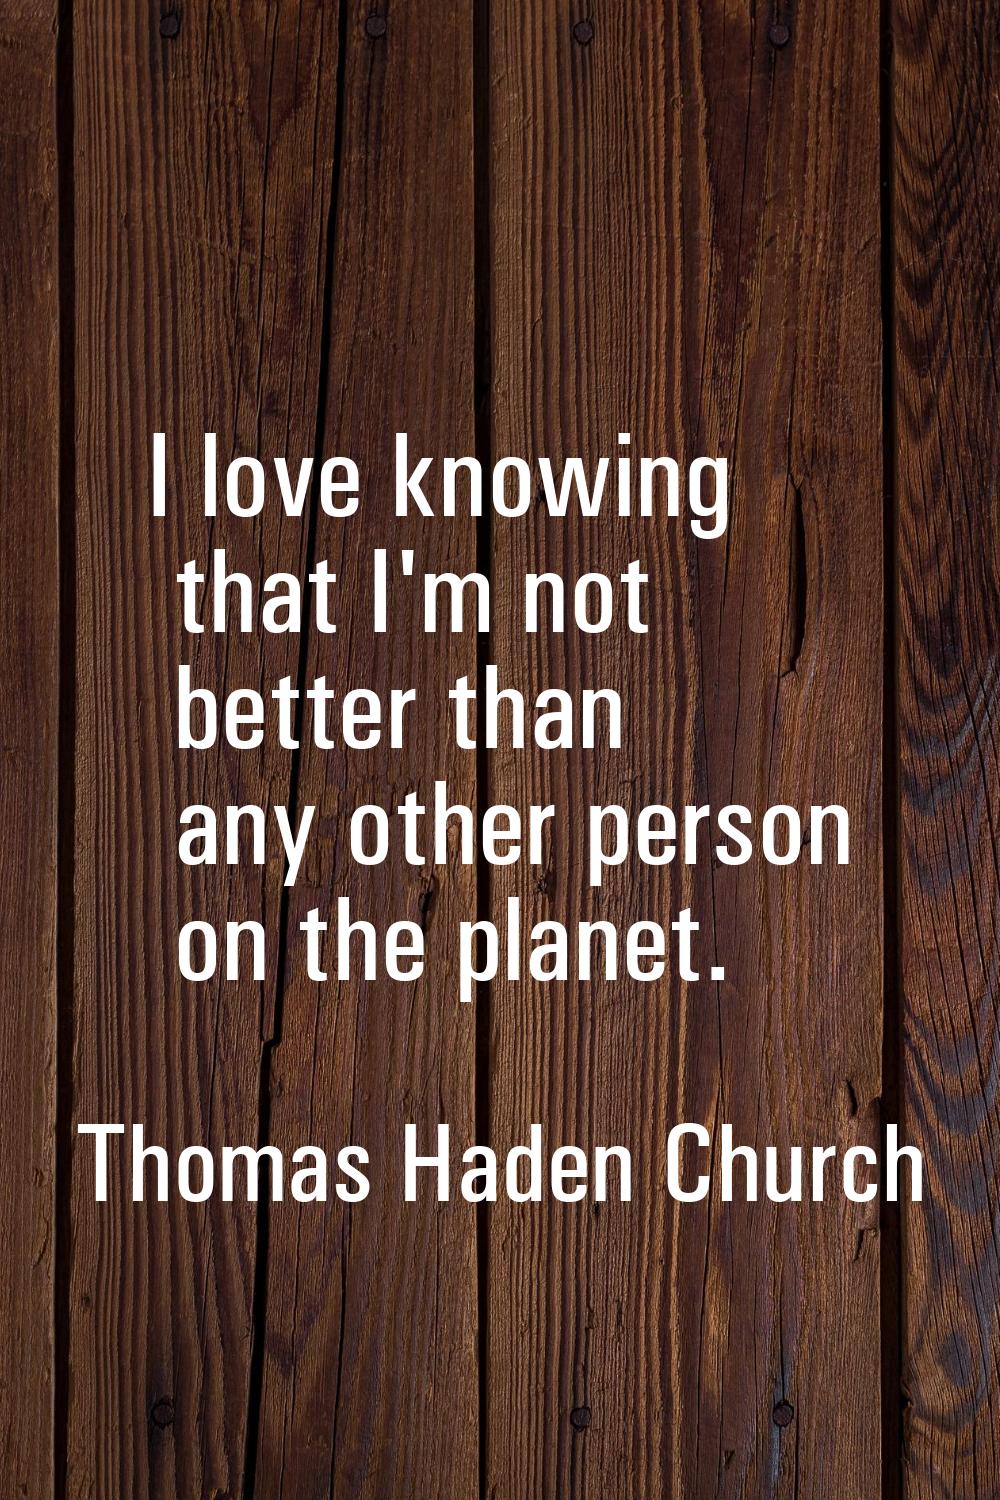 I love knowing that I'm not better than any other person on the planet.